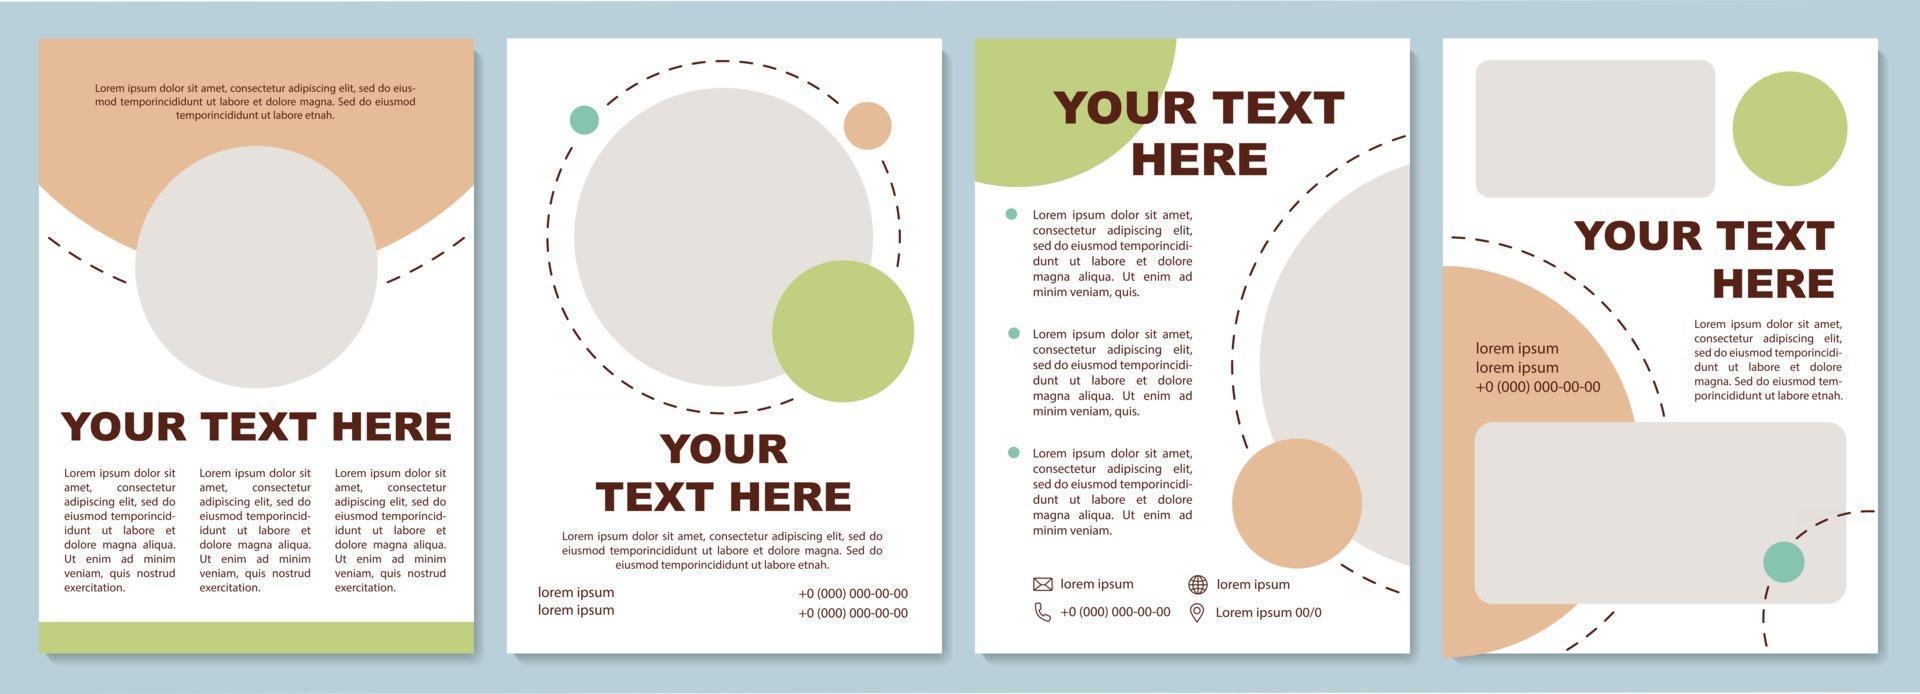 Products review brochure template. Marketing campaign. Flyer, booklet, leaflet print, cover design with copy space. Your text here. Vector layouts for magazines, annual reports, advertising posters